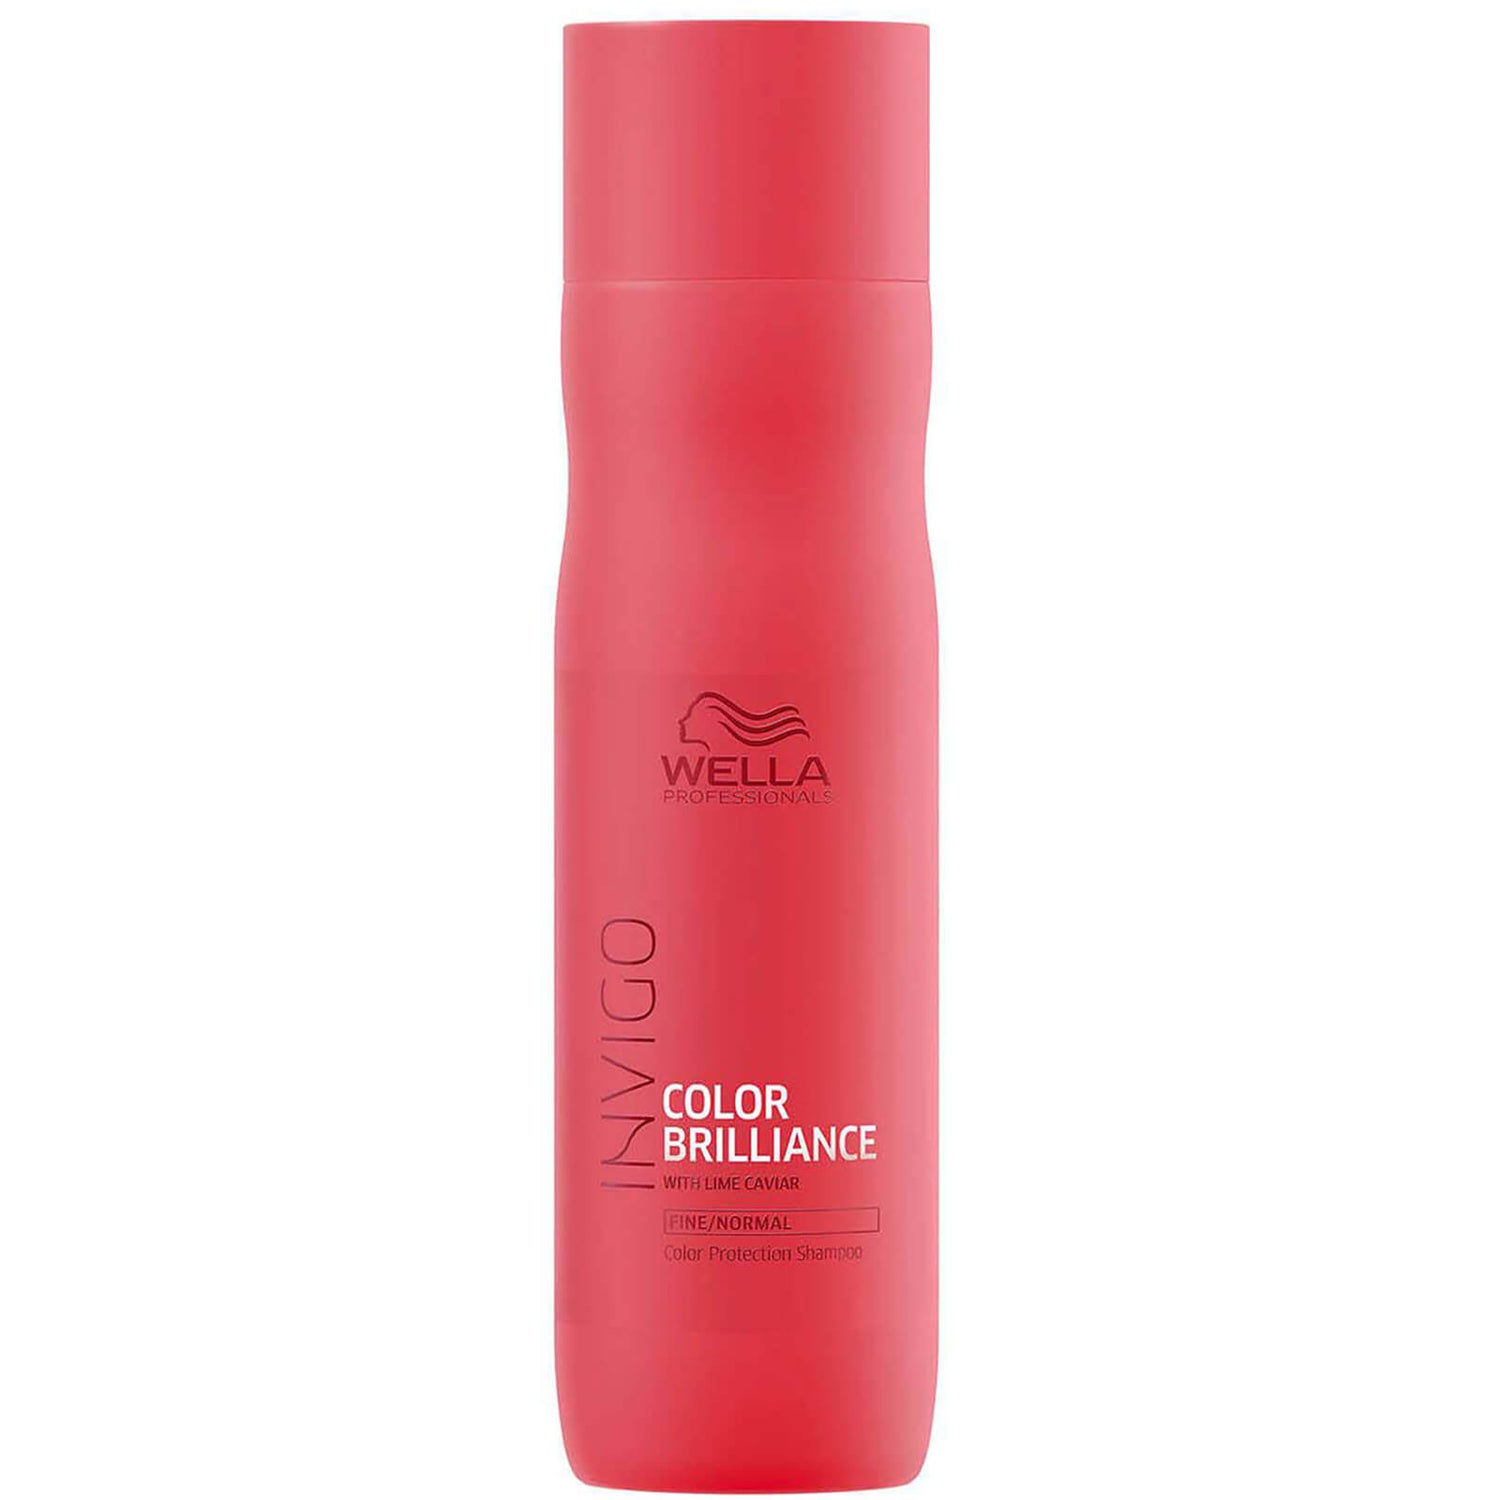 WELLA PROFESSIONALS BRILLIANCE SHAMPOO FOR FINE TO NORMAL, COLOURED HAIR (250ML)